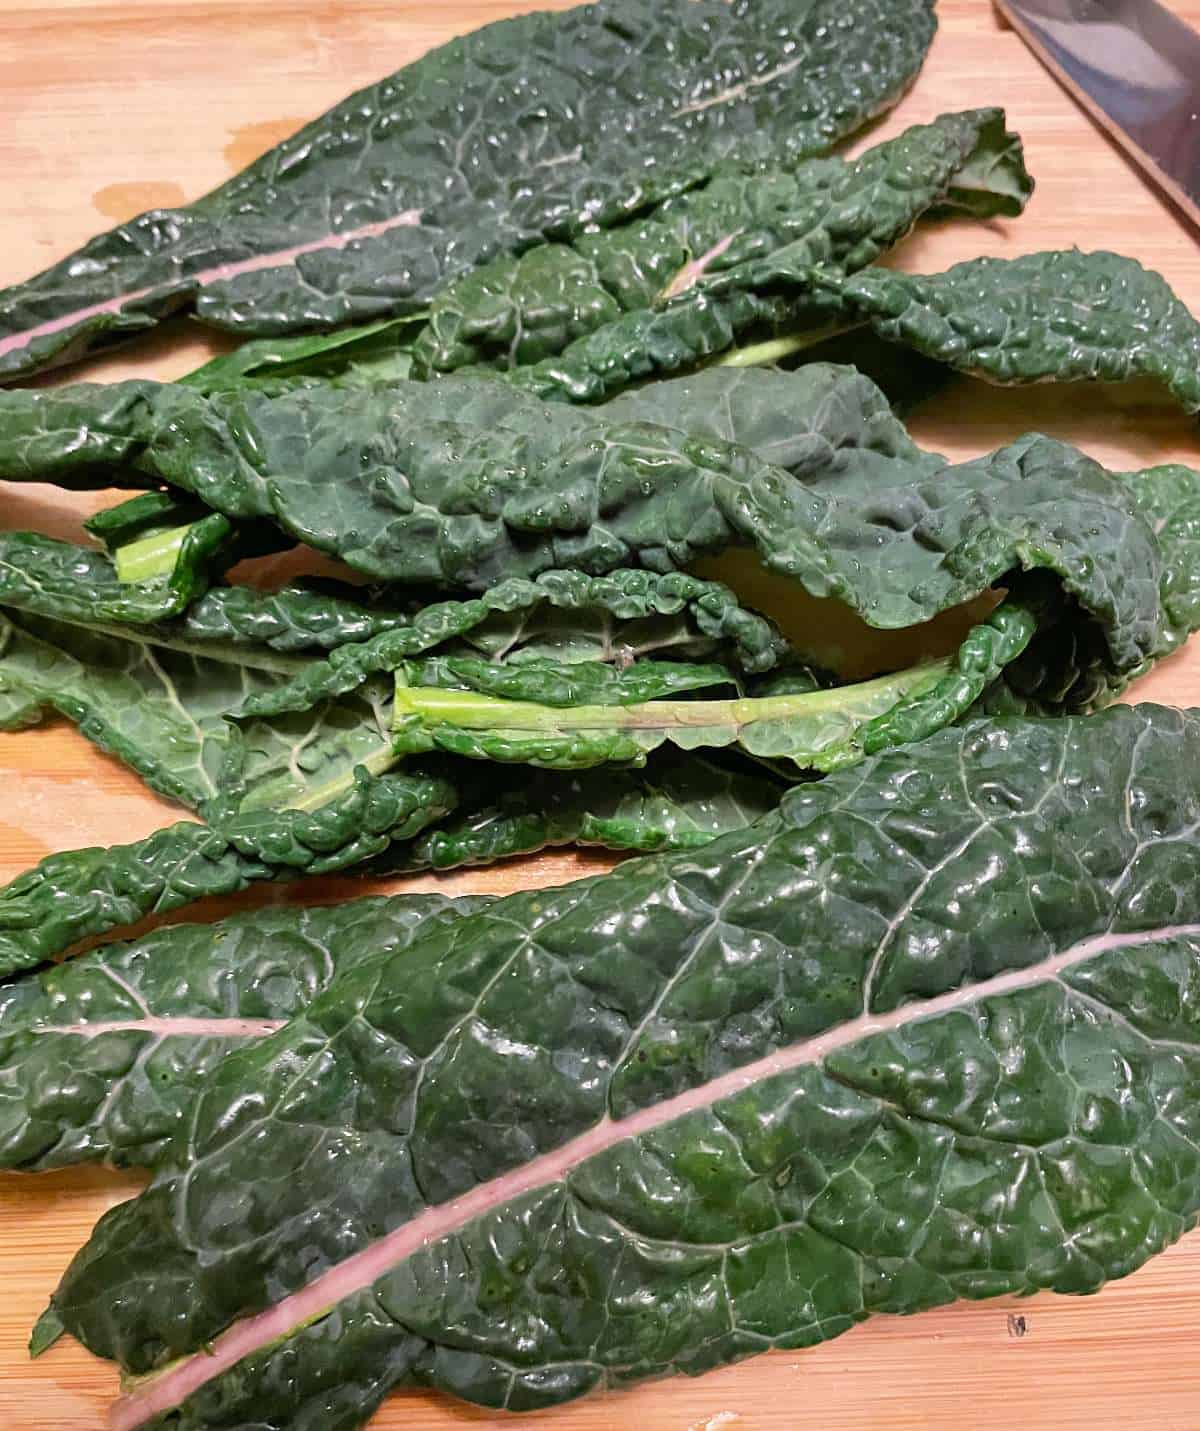 Lacinato kale on a wooden cutting board.